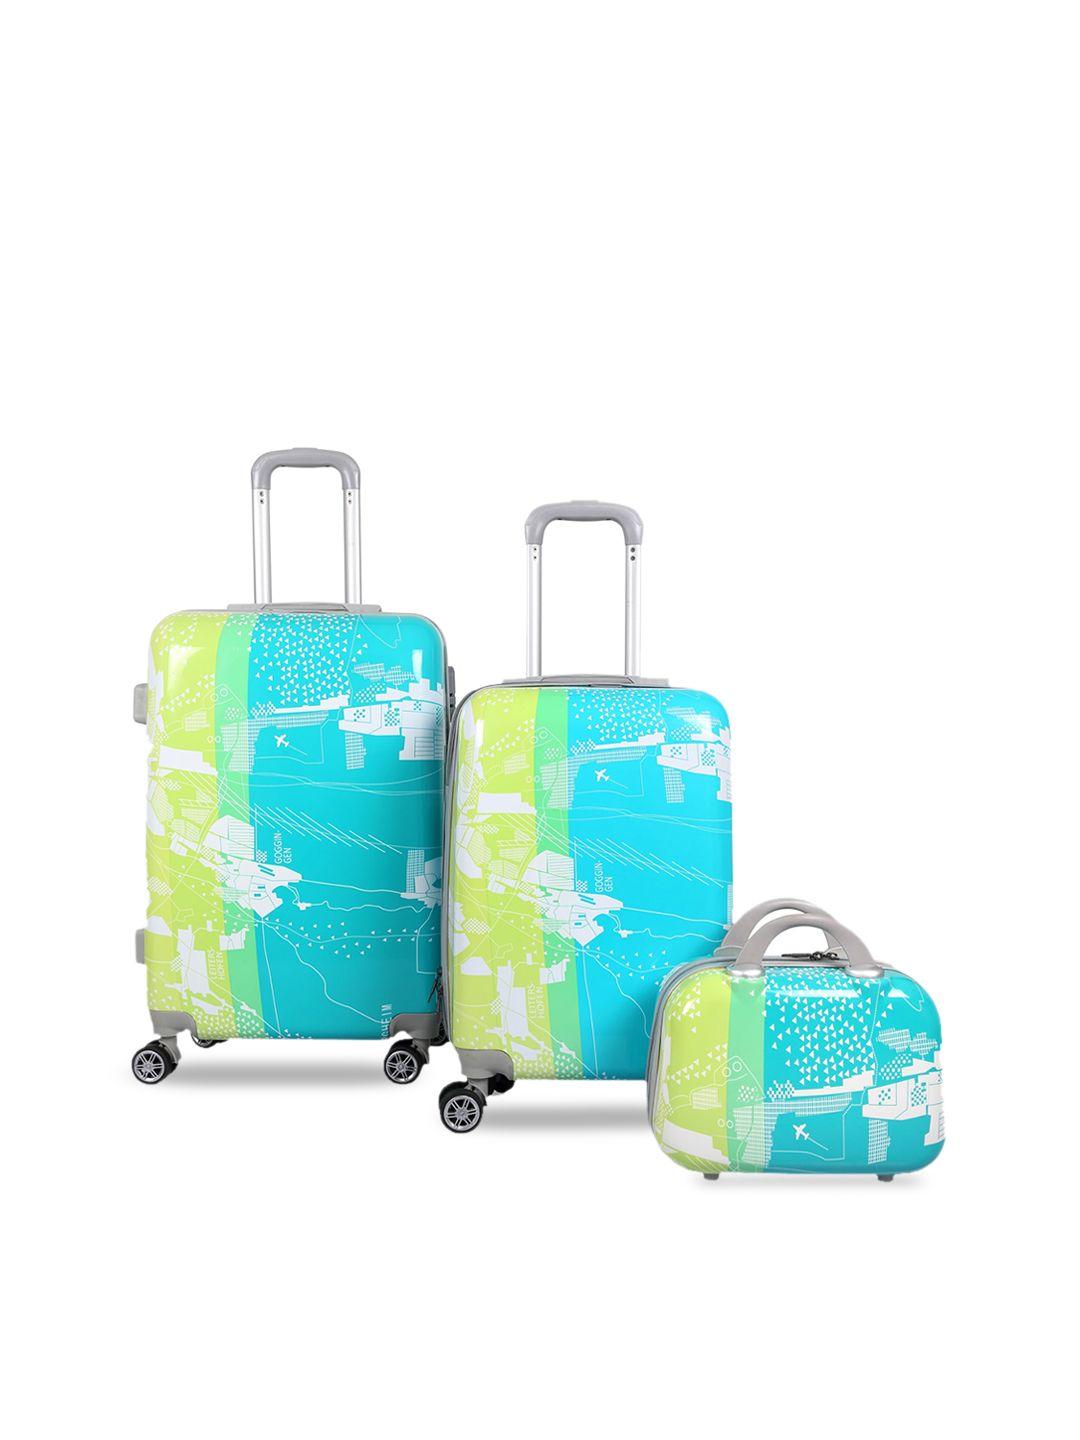 polo class blue & green printed set of 3 travelling bag